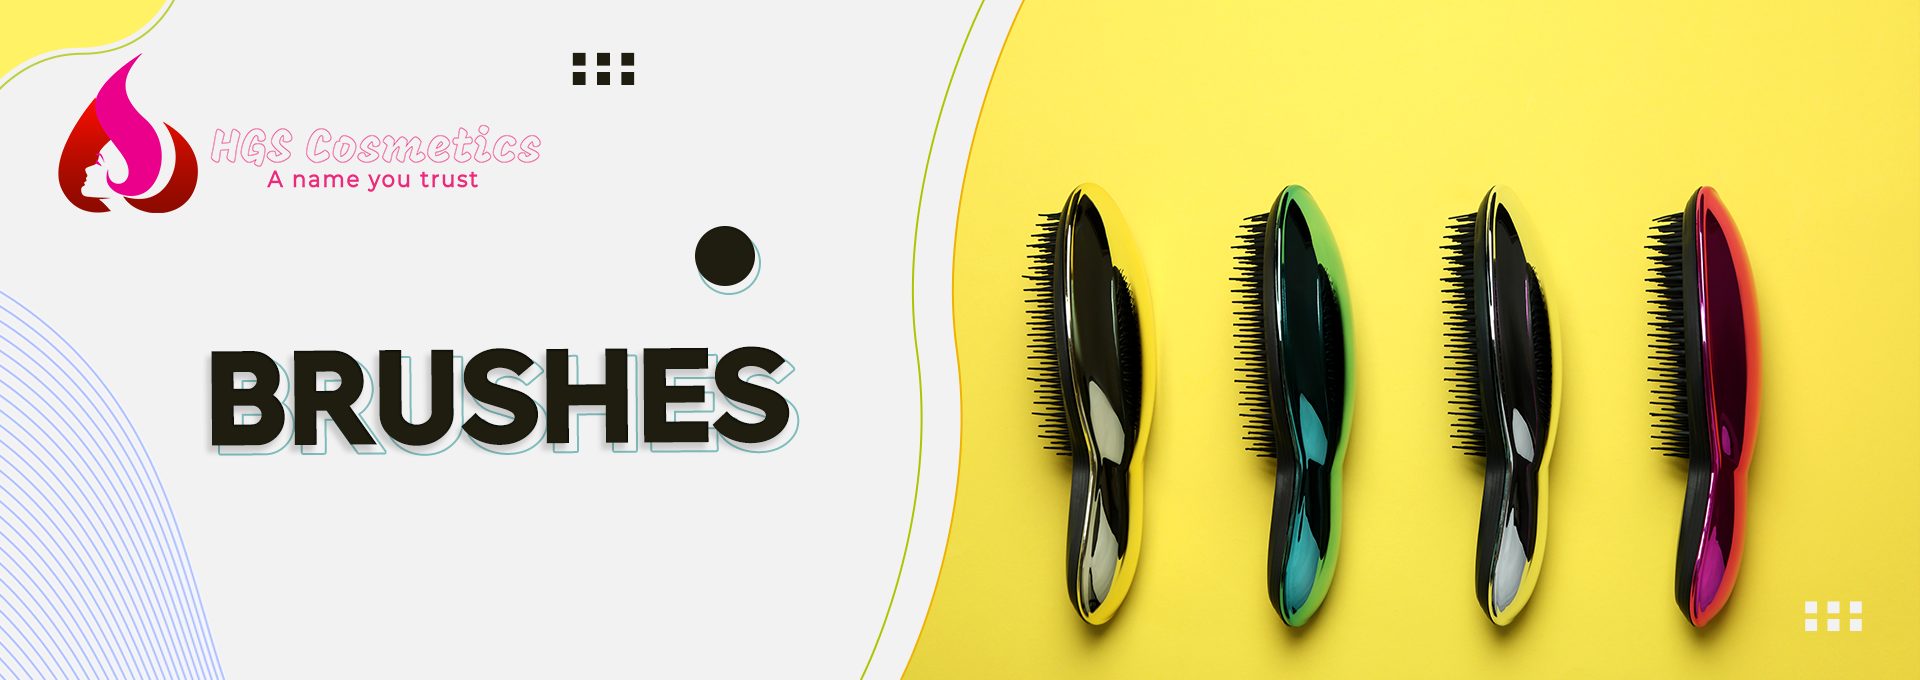 Shop Best Brushes For Makeup products Online @ HGS Cosmetics